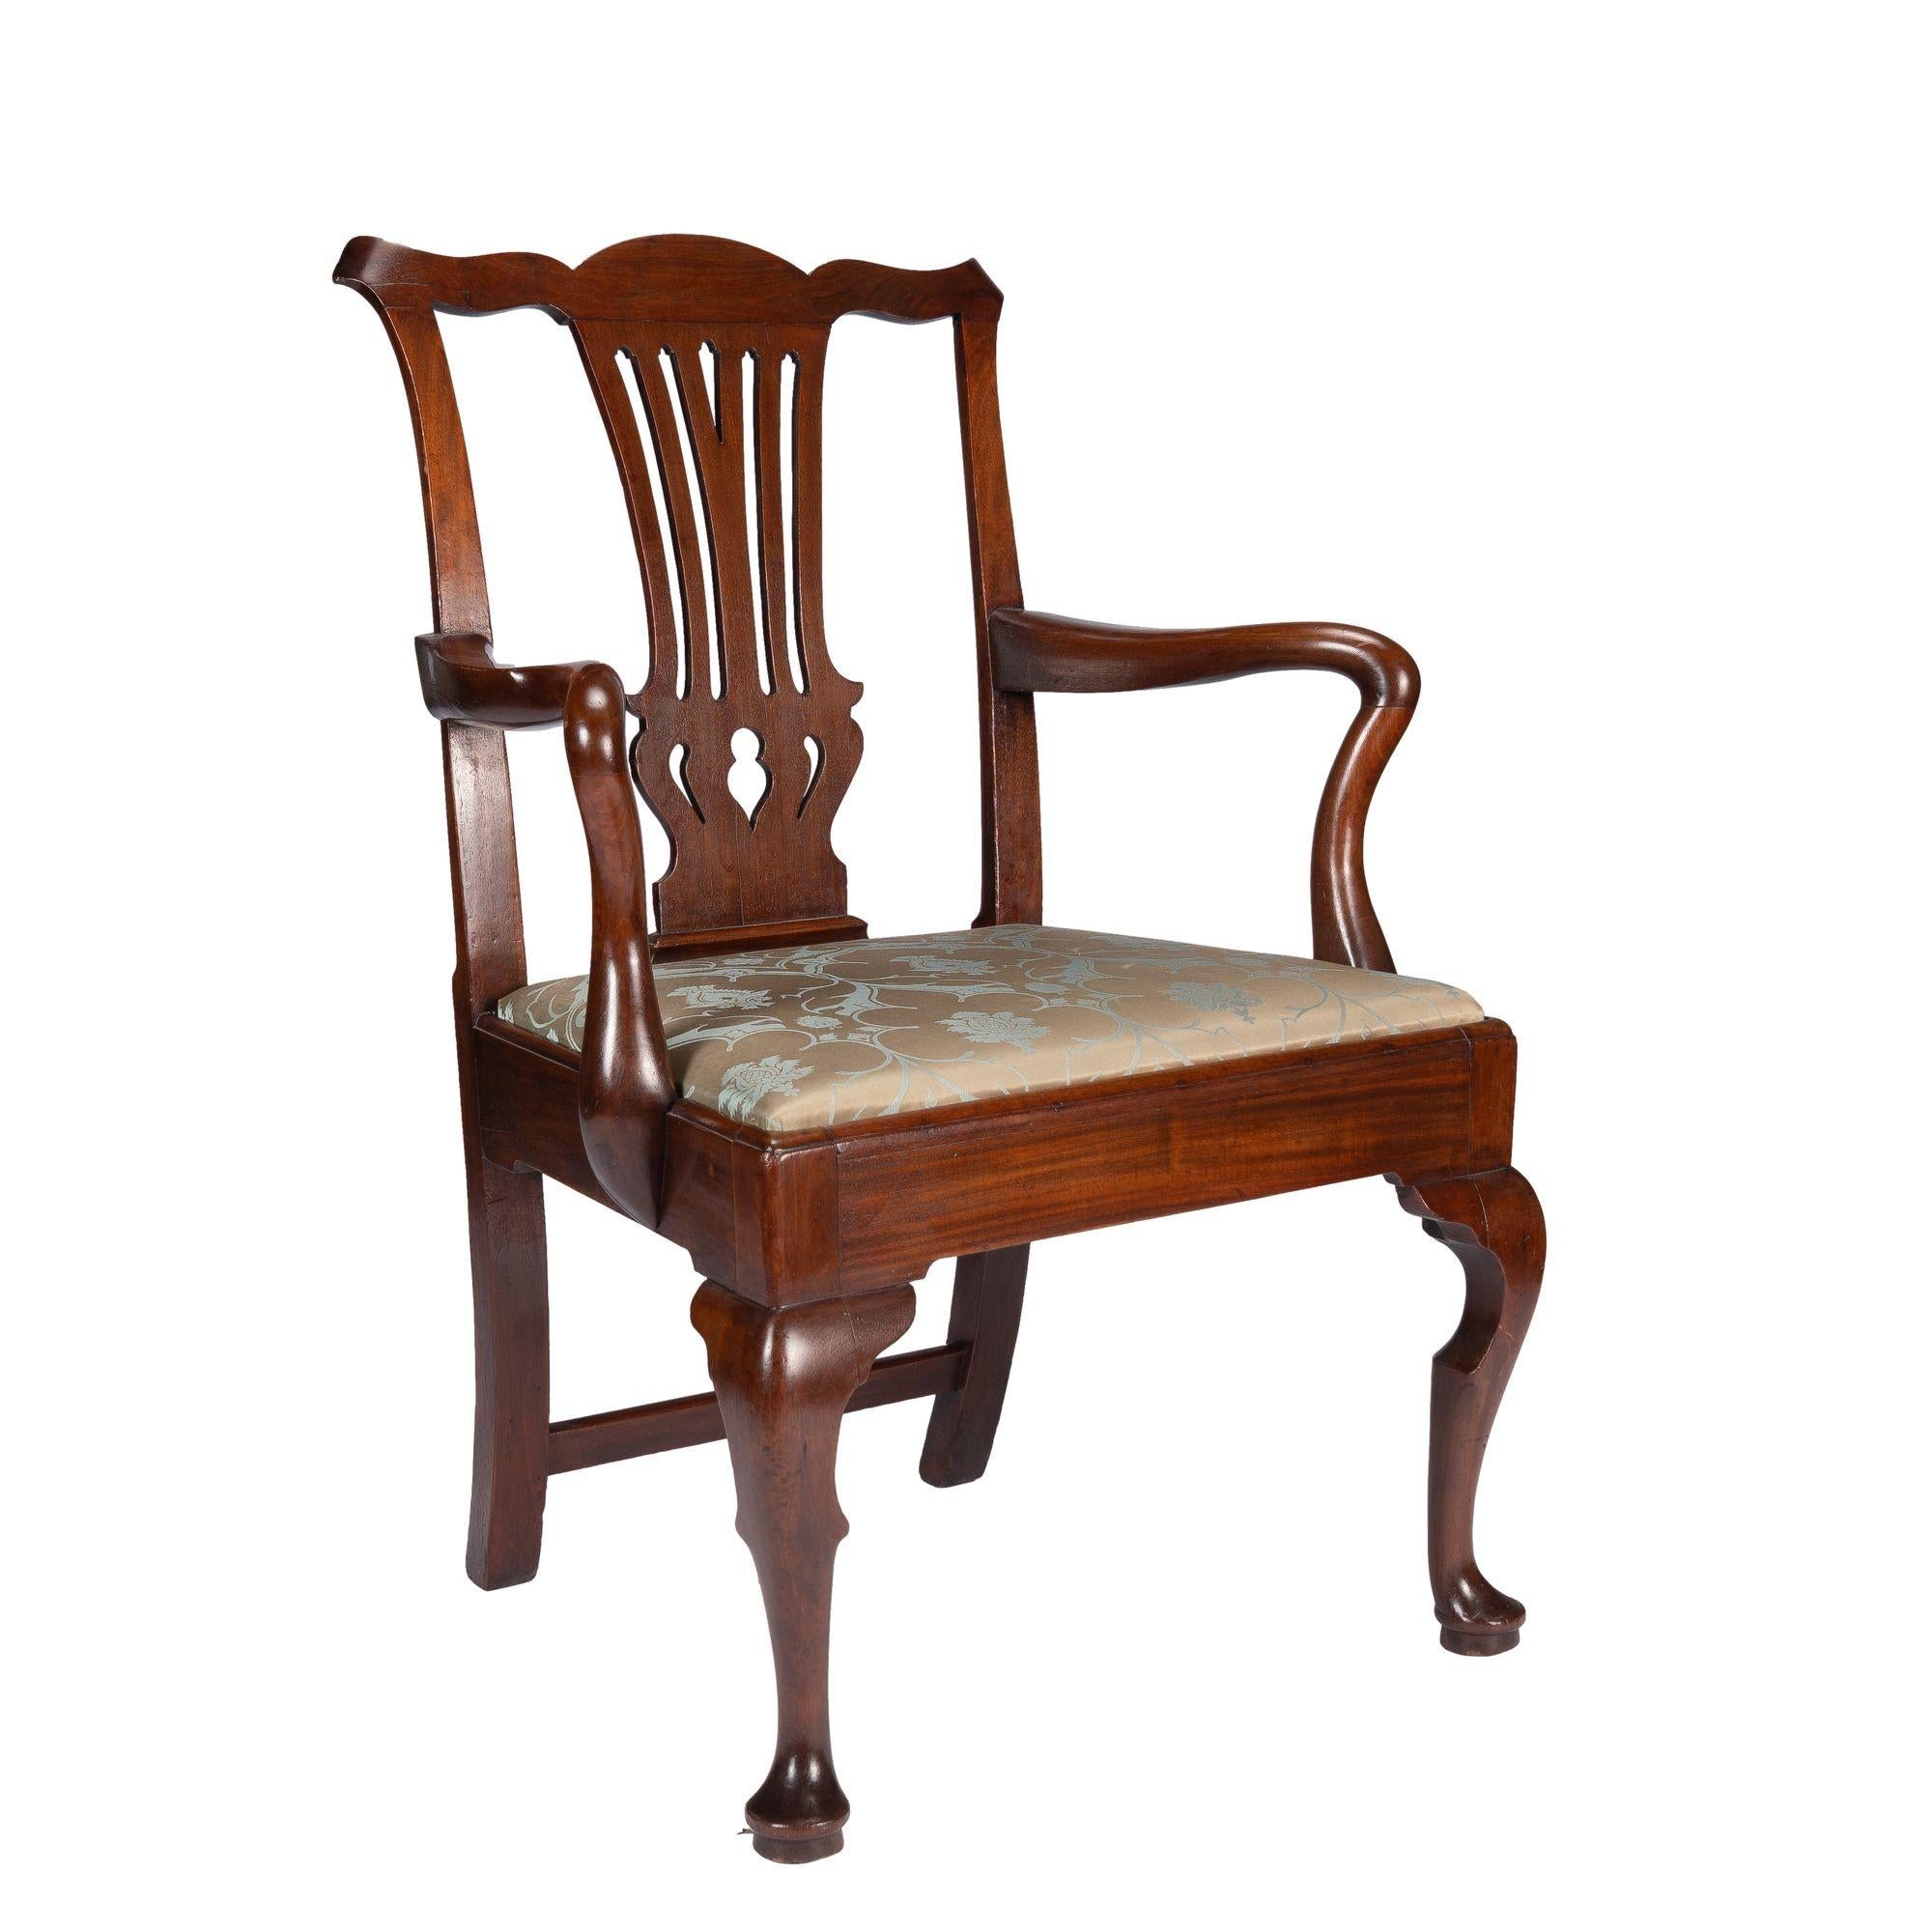 English George II Walnut Armchair with Upholstered Slip Seat, c. 1740 For Sale 3